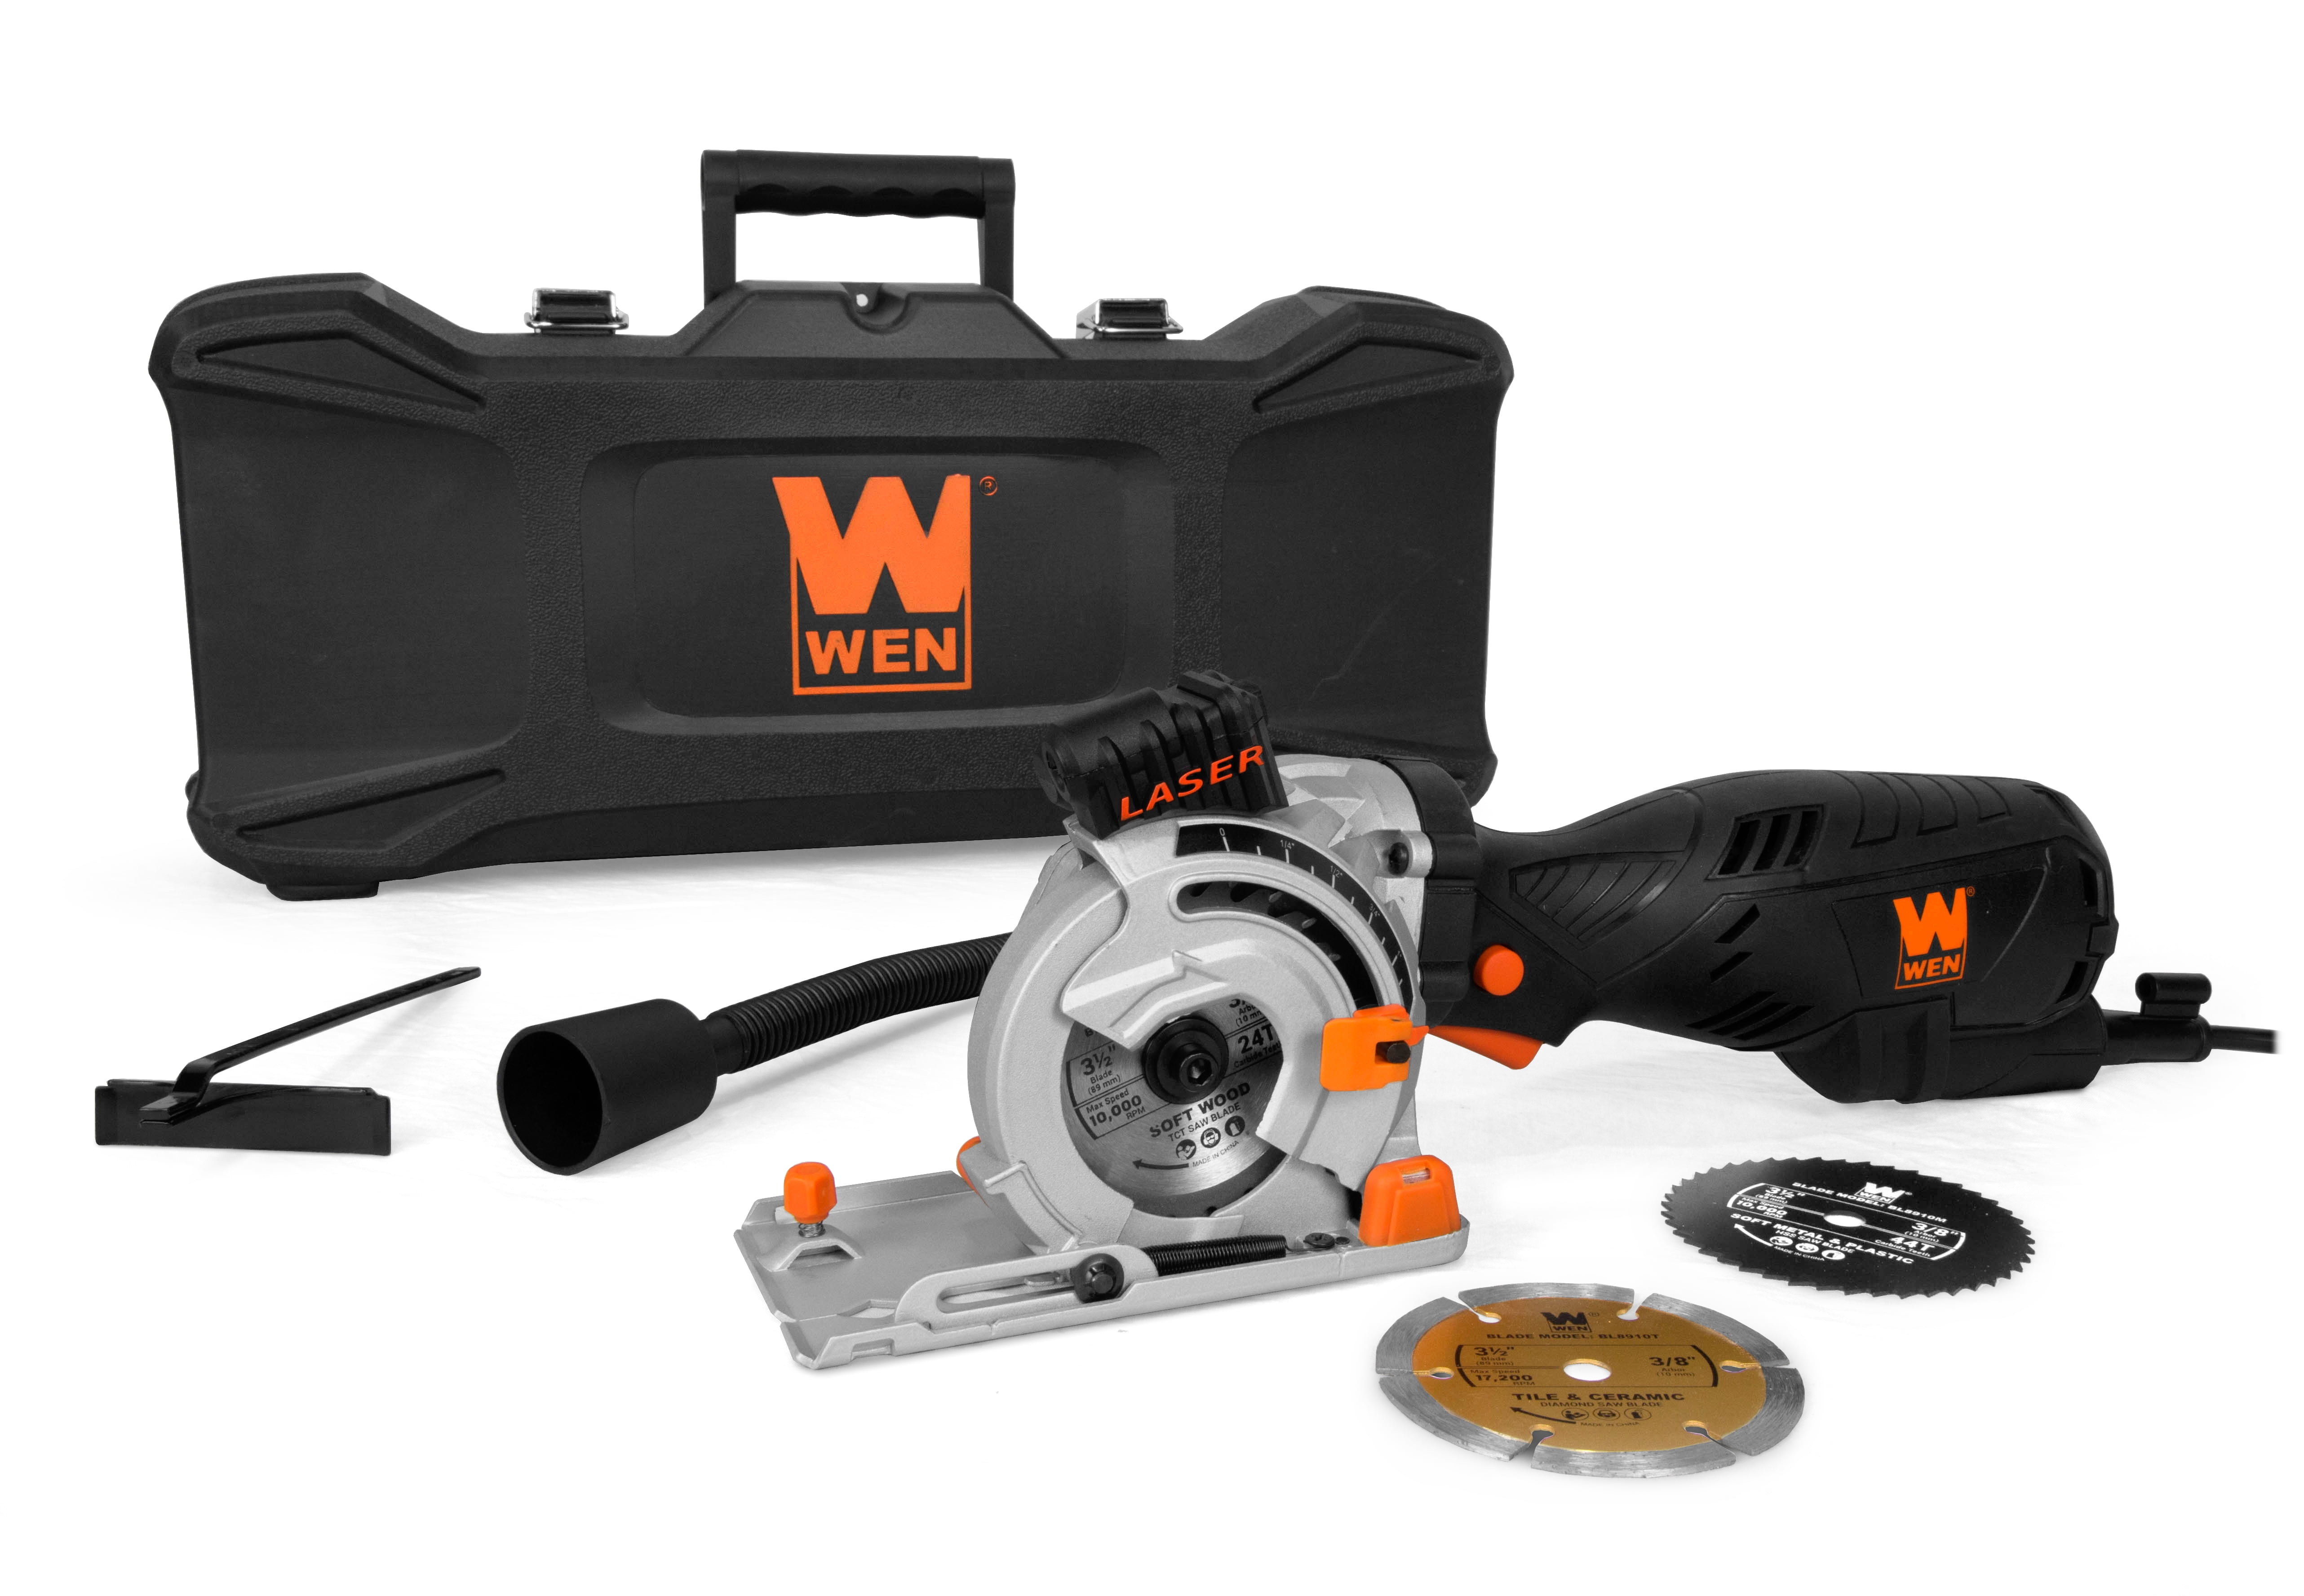 WEN 5-Amp 3-1/2-Inch Plunge Cut Compact Circular Saw with Laser, Carrying  Case, and Three Blades, 3620